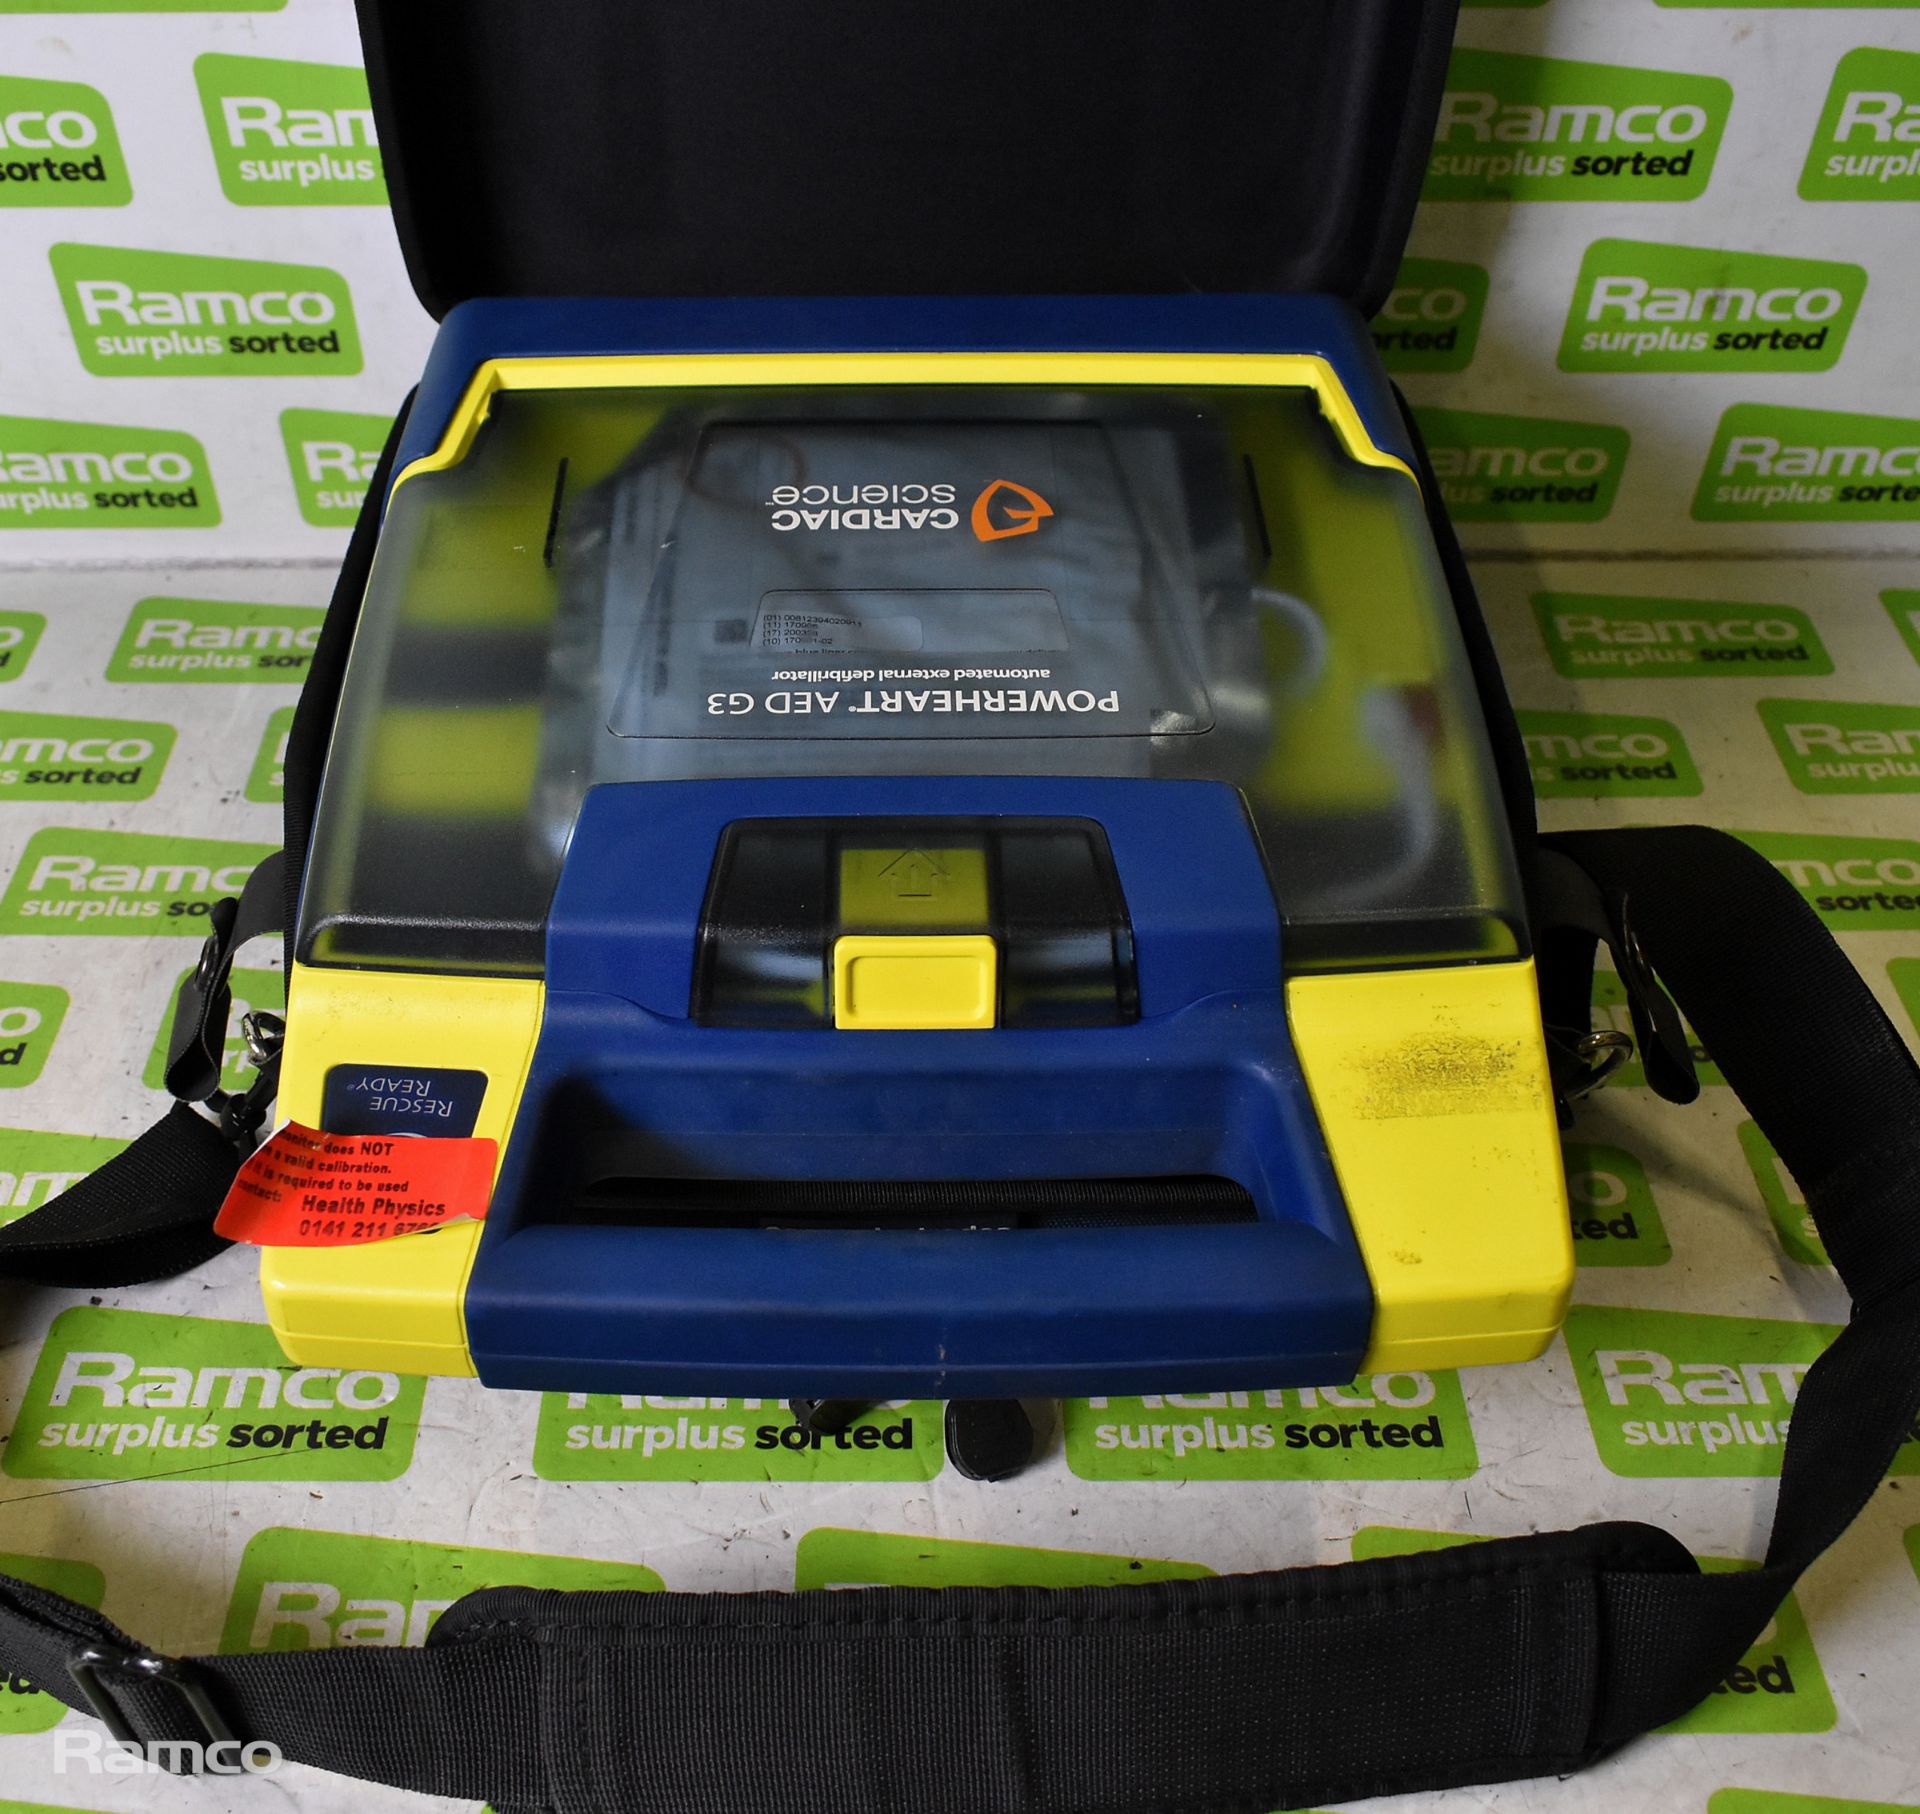 3x Cardiac Science G3 AED defibrillator - in carry case (REQUIRES CALIBRATION) - Image 3 of 15